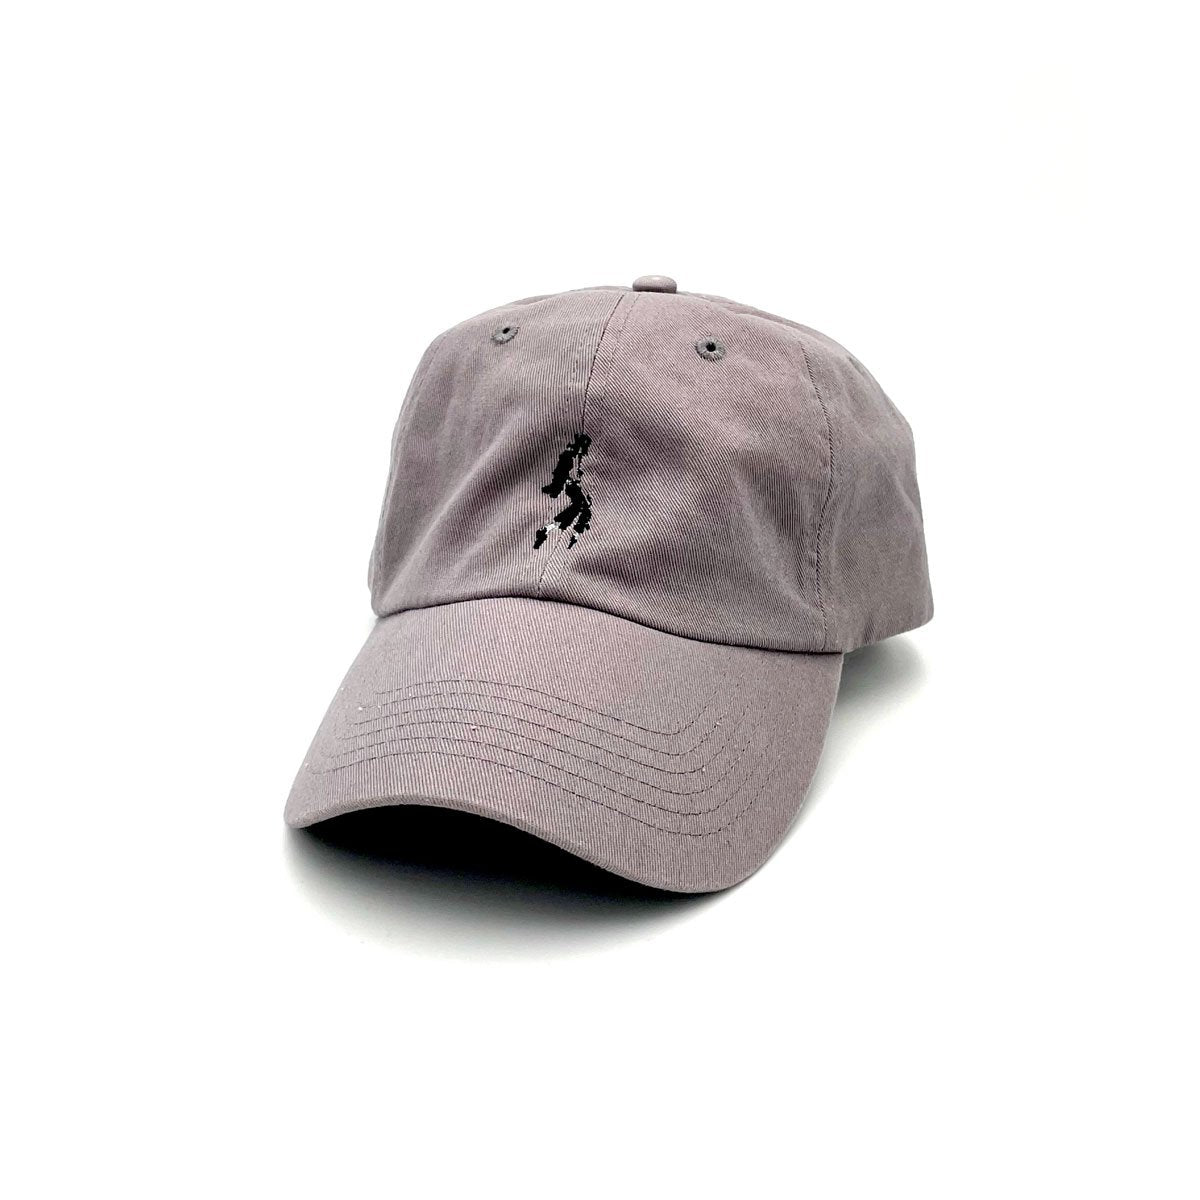 MJ THE MUSICAL Icon Cap - Grey - Image 1